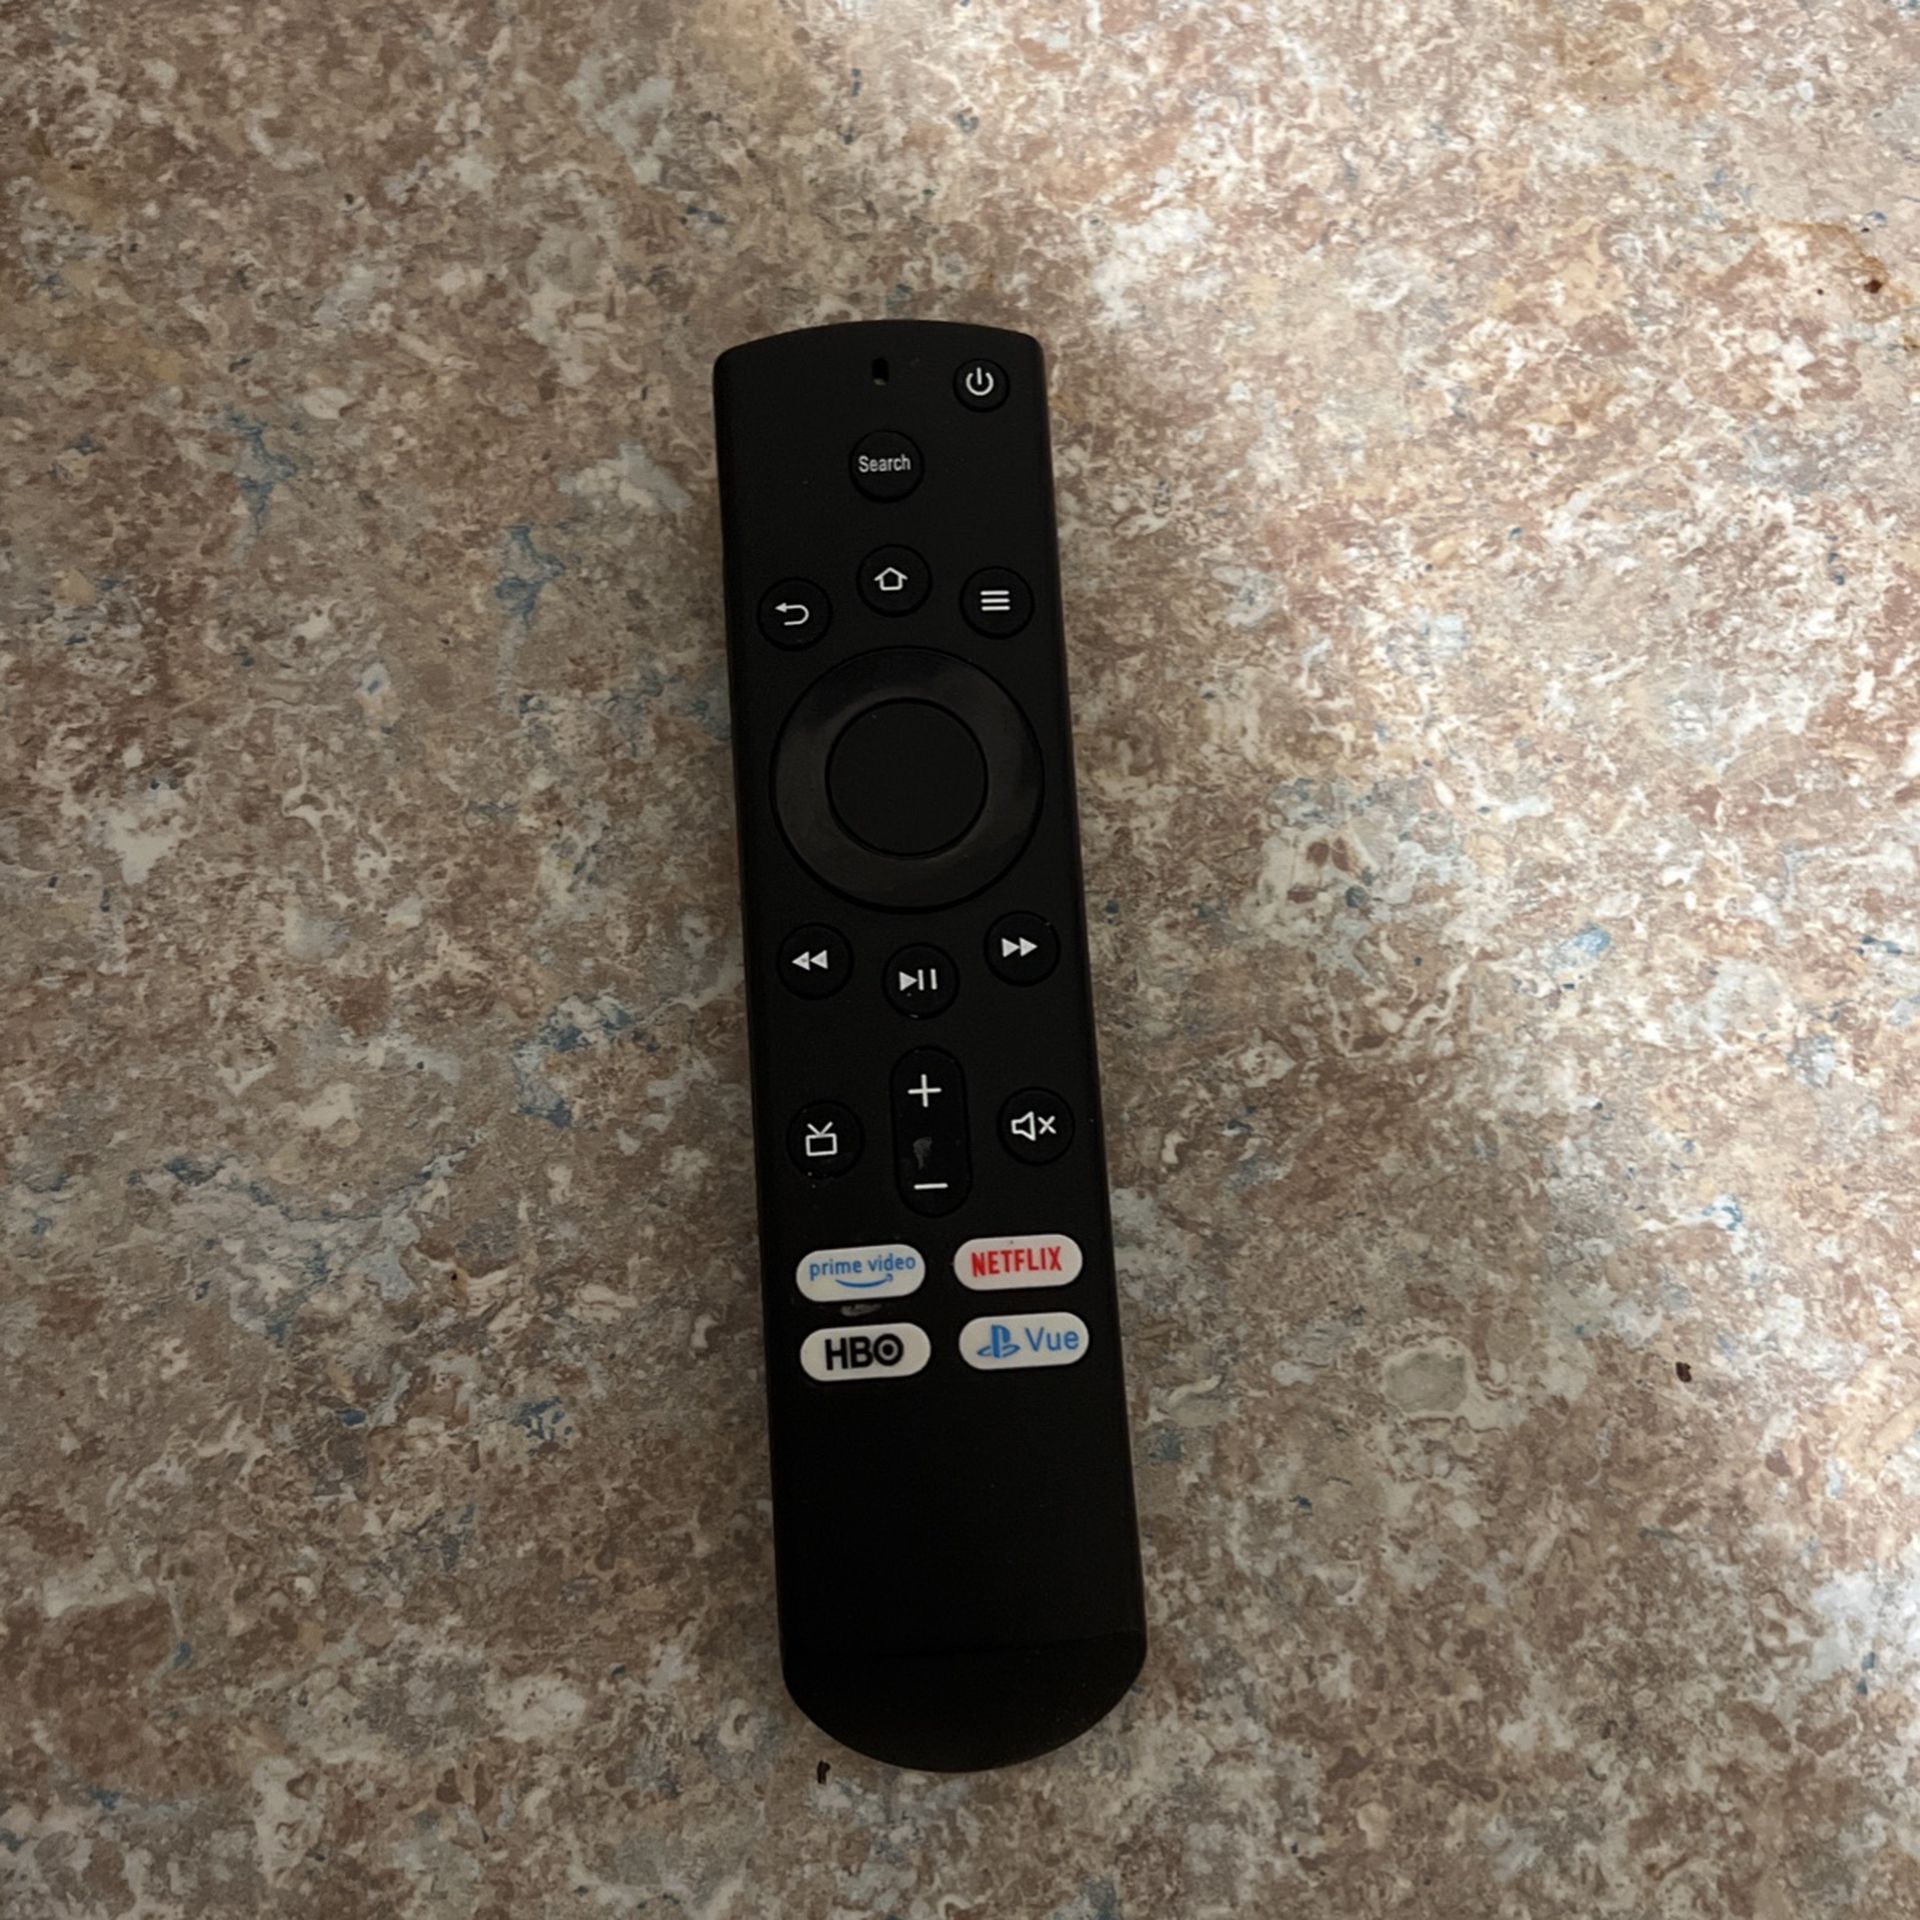 Amazon Replacement Control For Fire Stick 